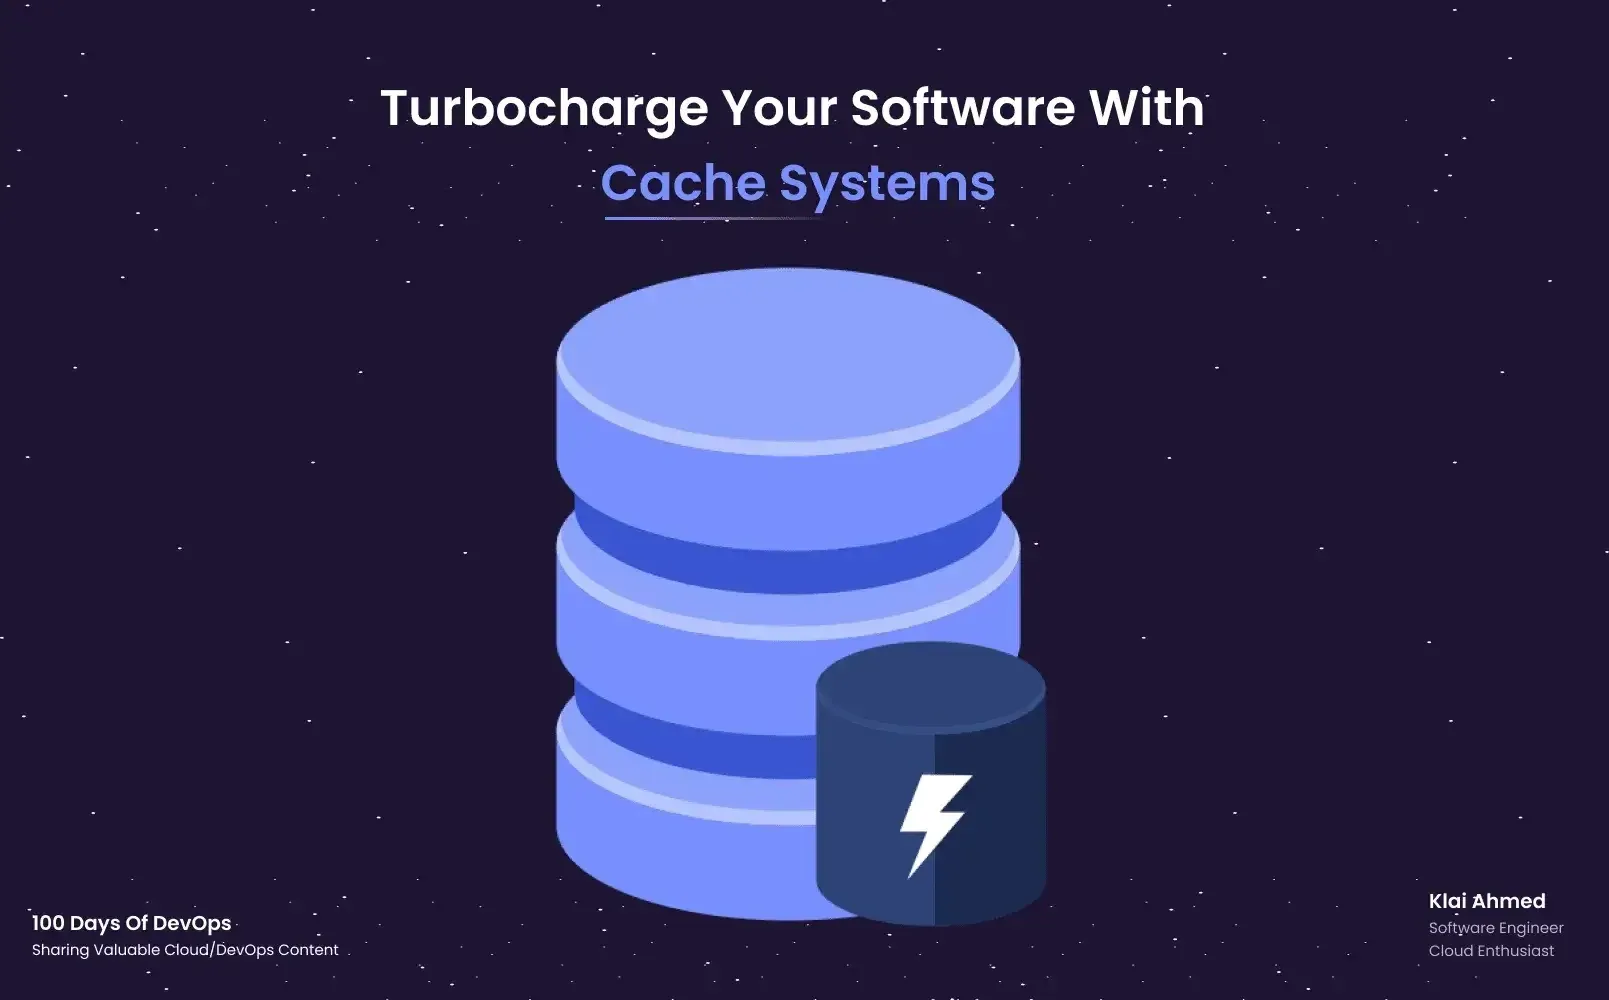 Turbocharge Your Software: The Ultimate Guide to Building a Lightning-Fast Caching System!